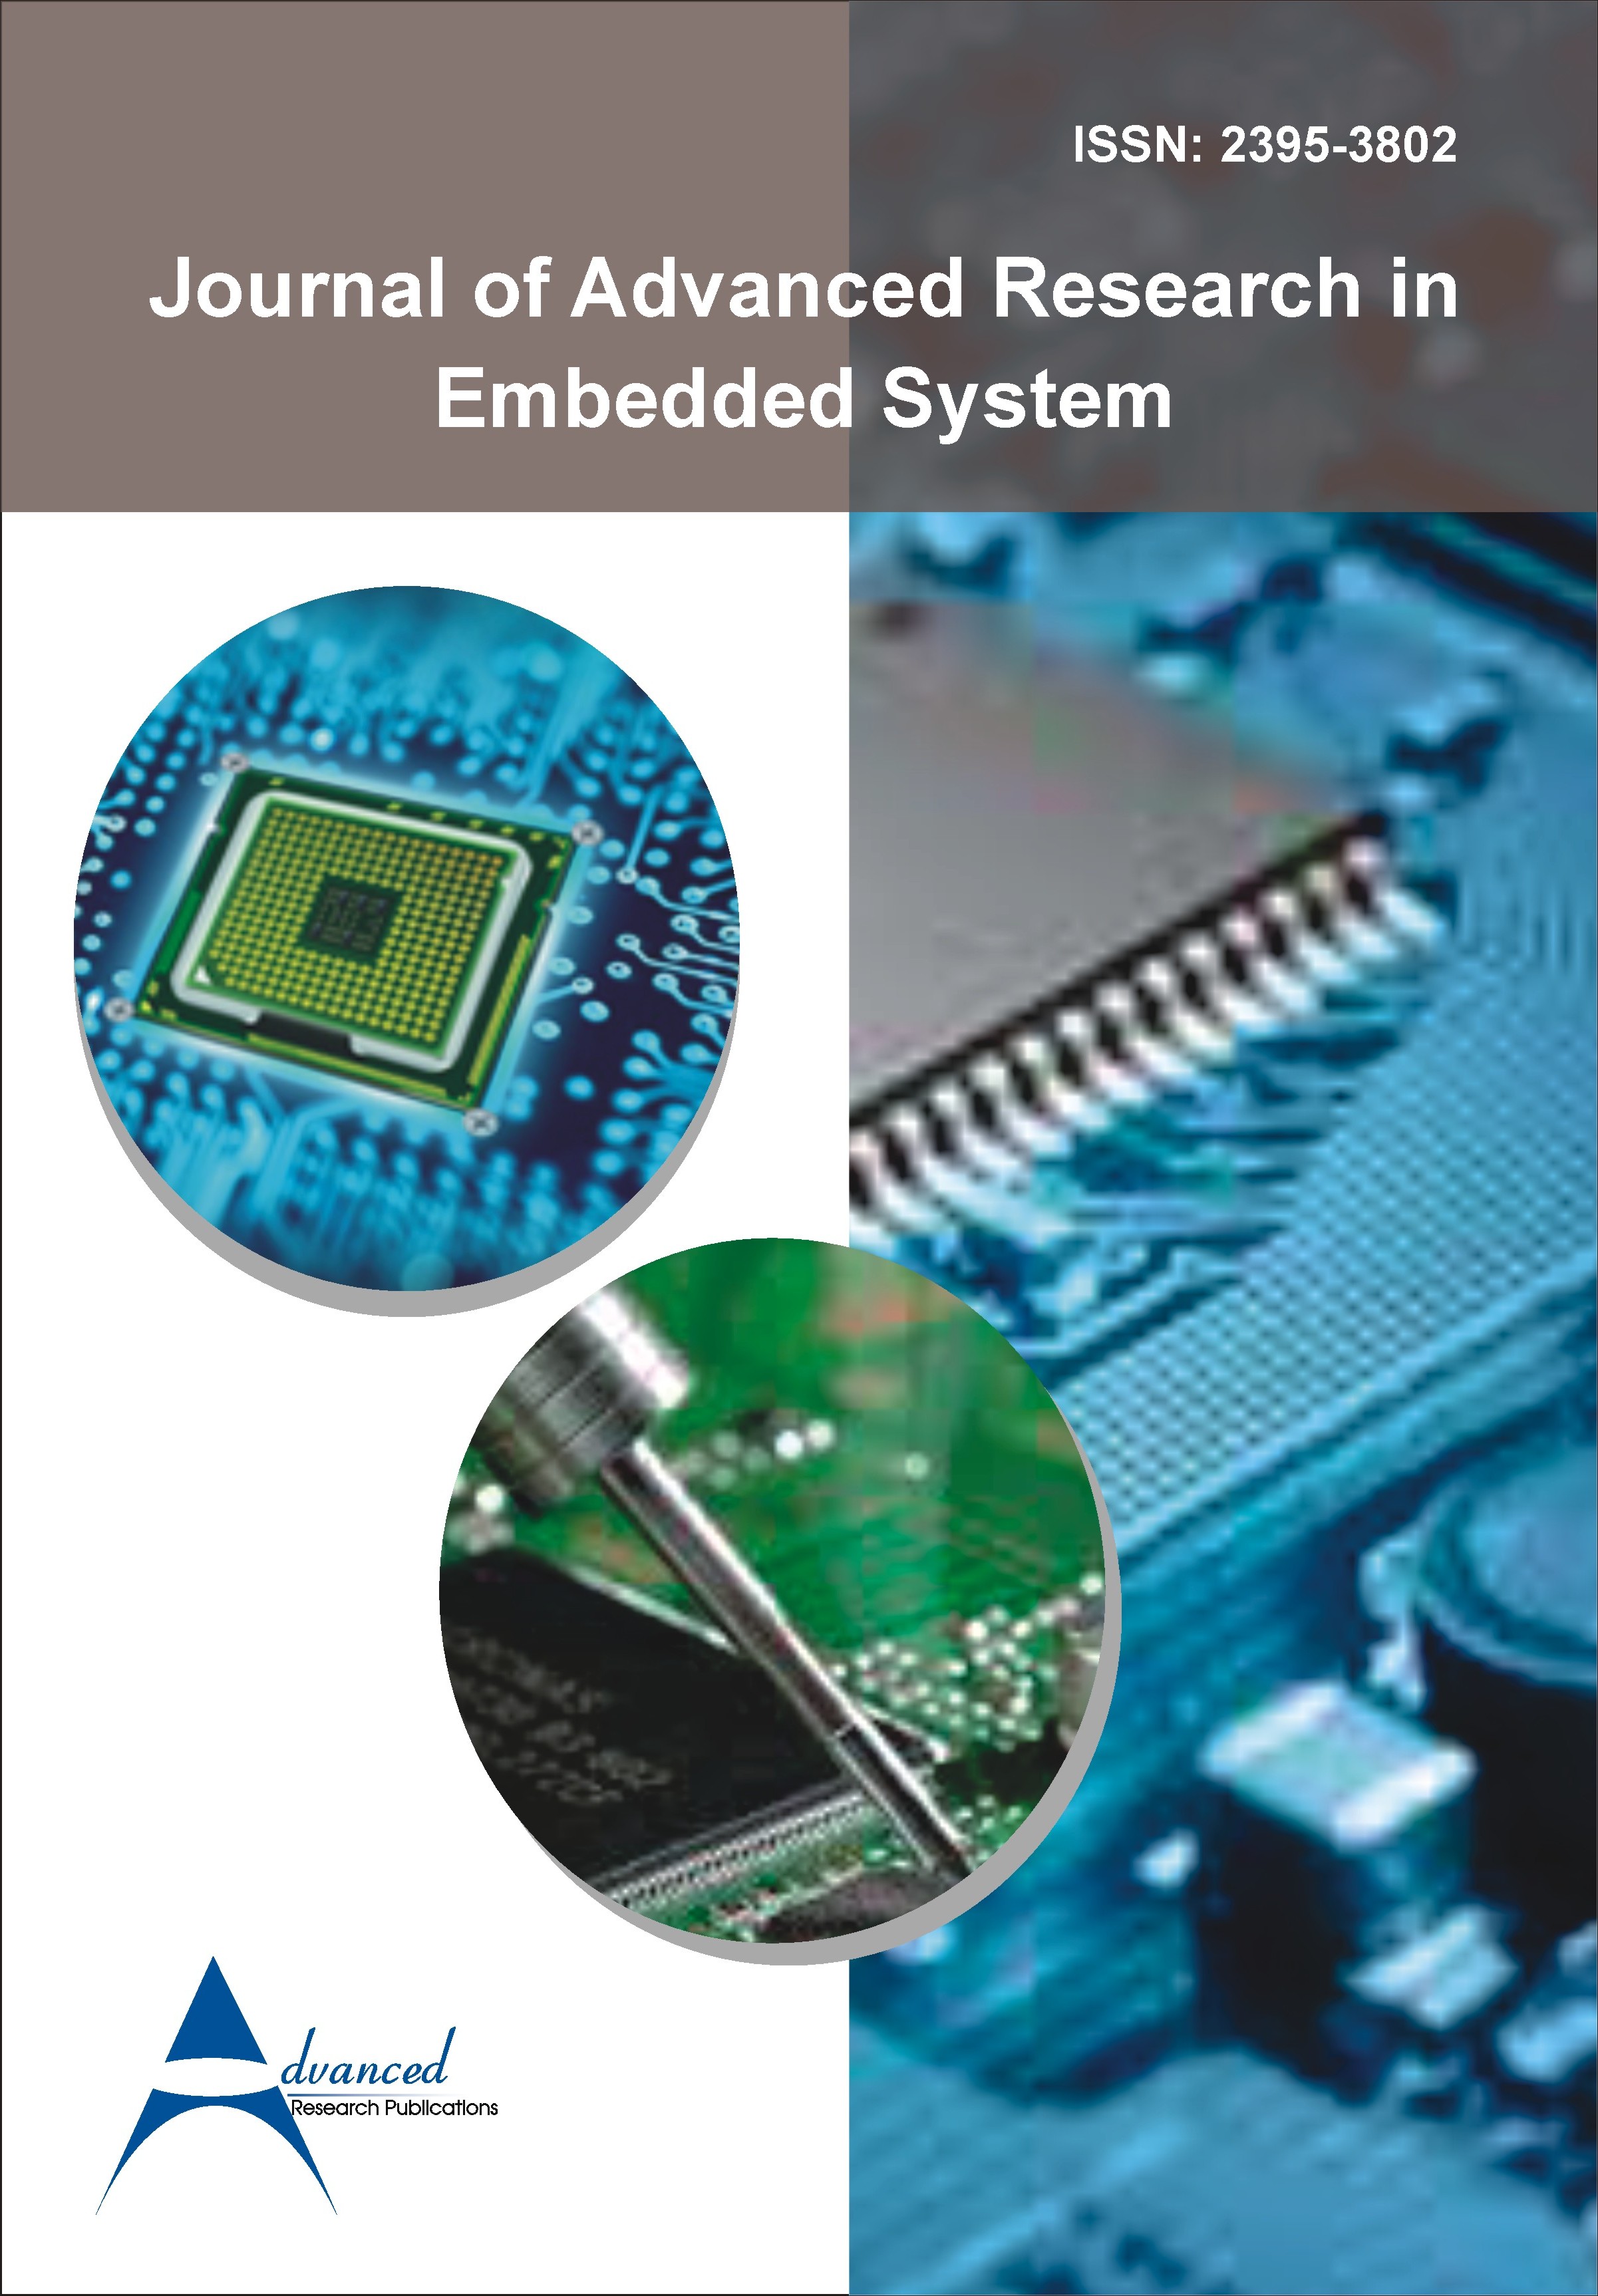 recent research papers in embedded systems